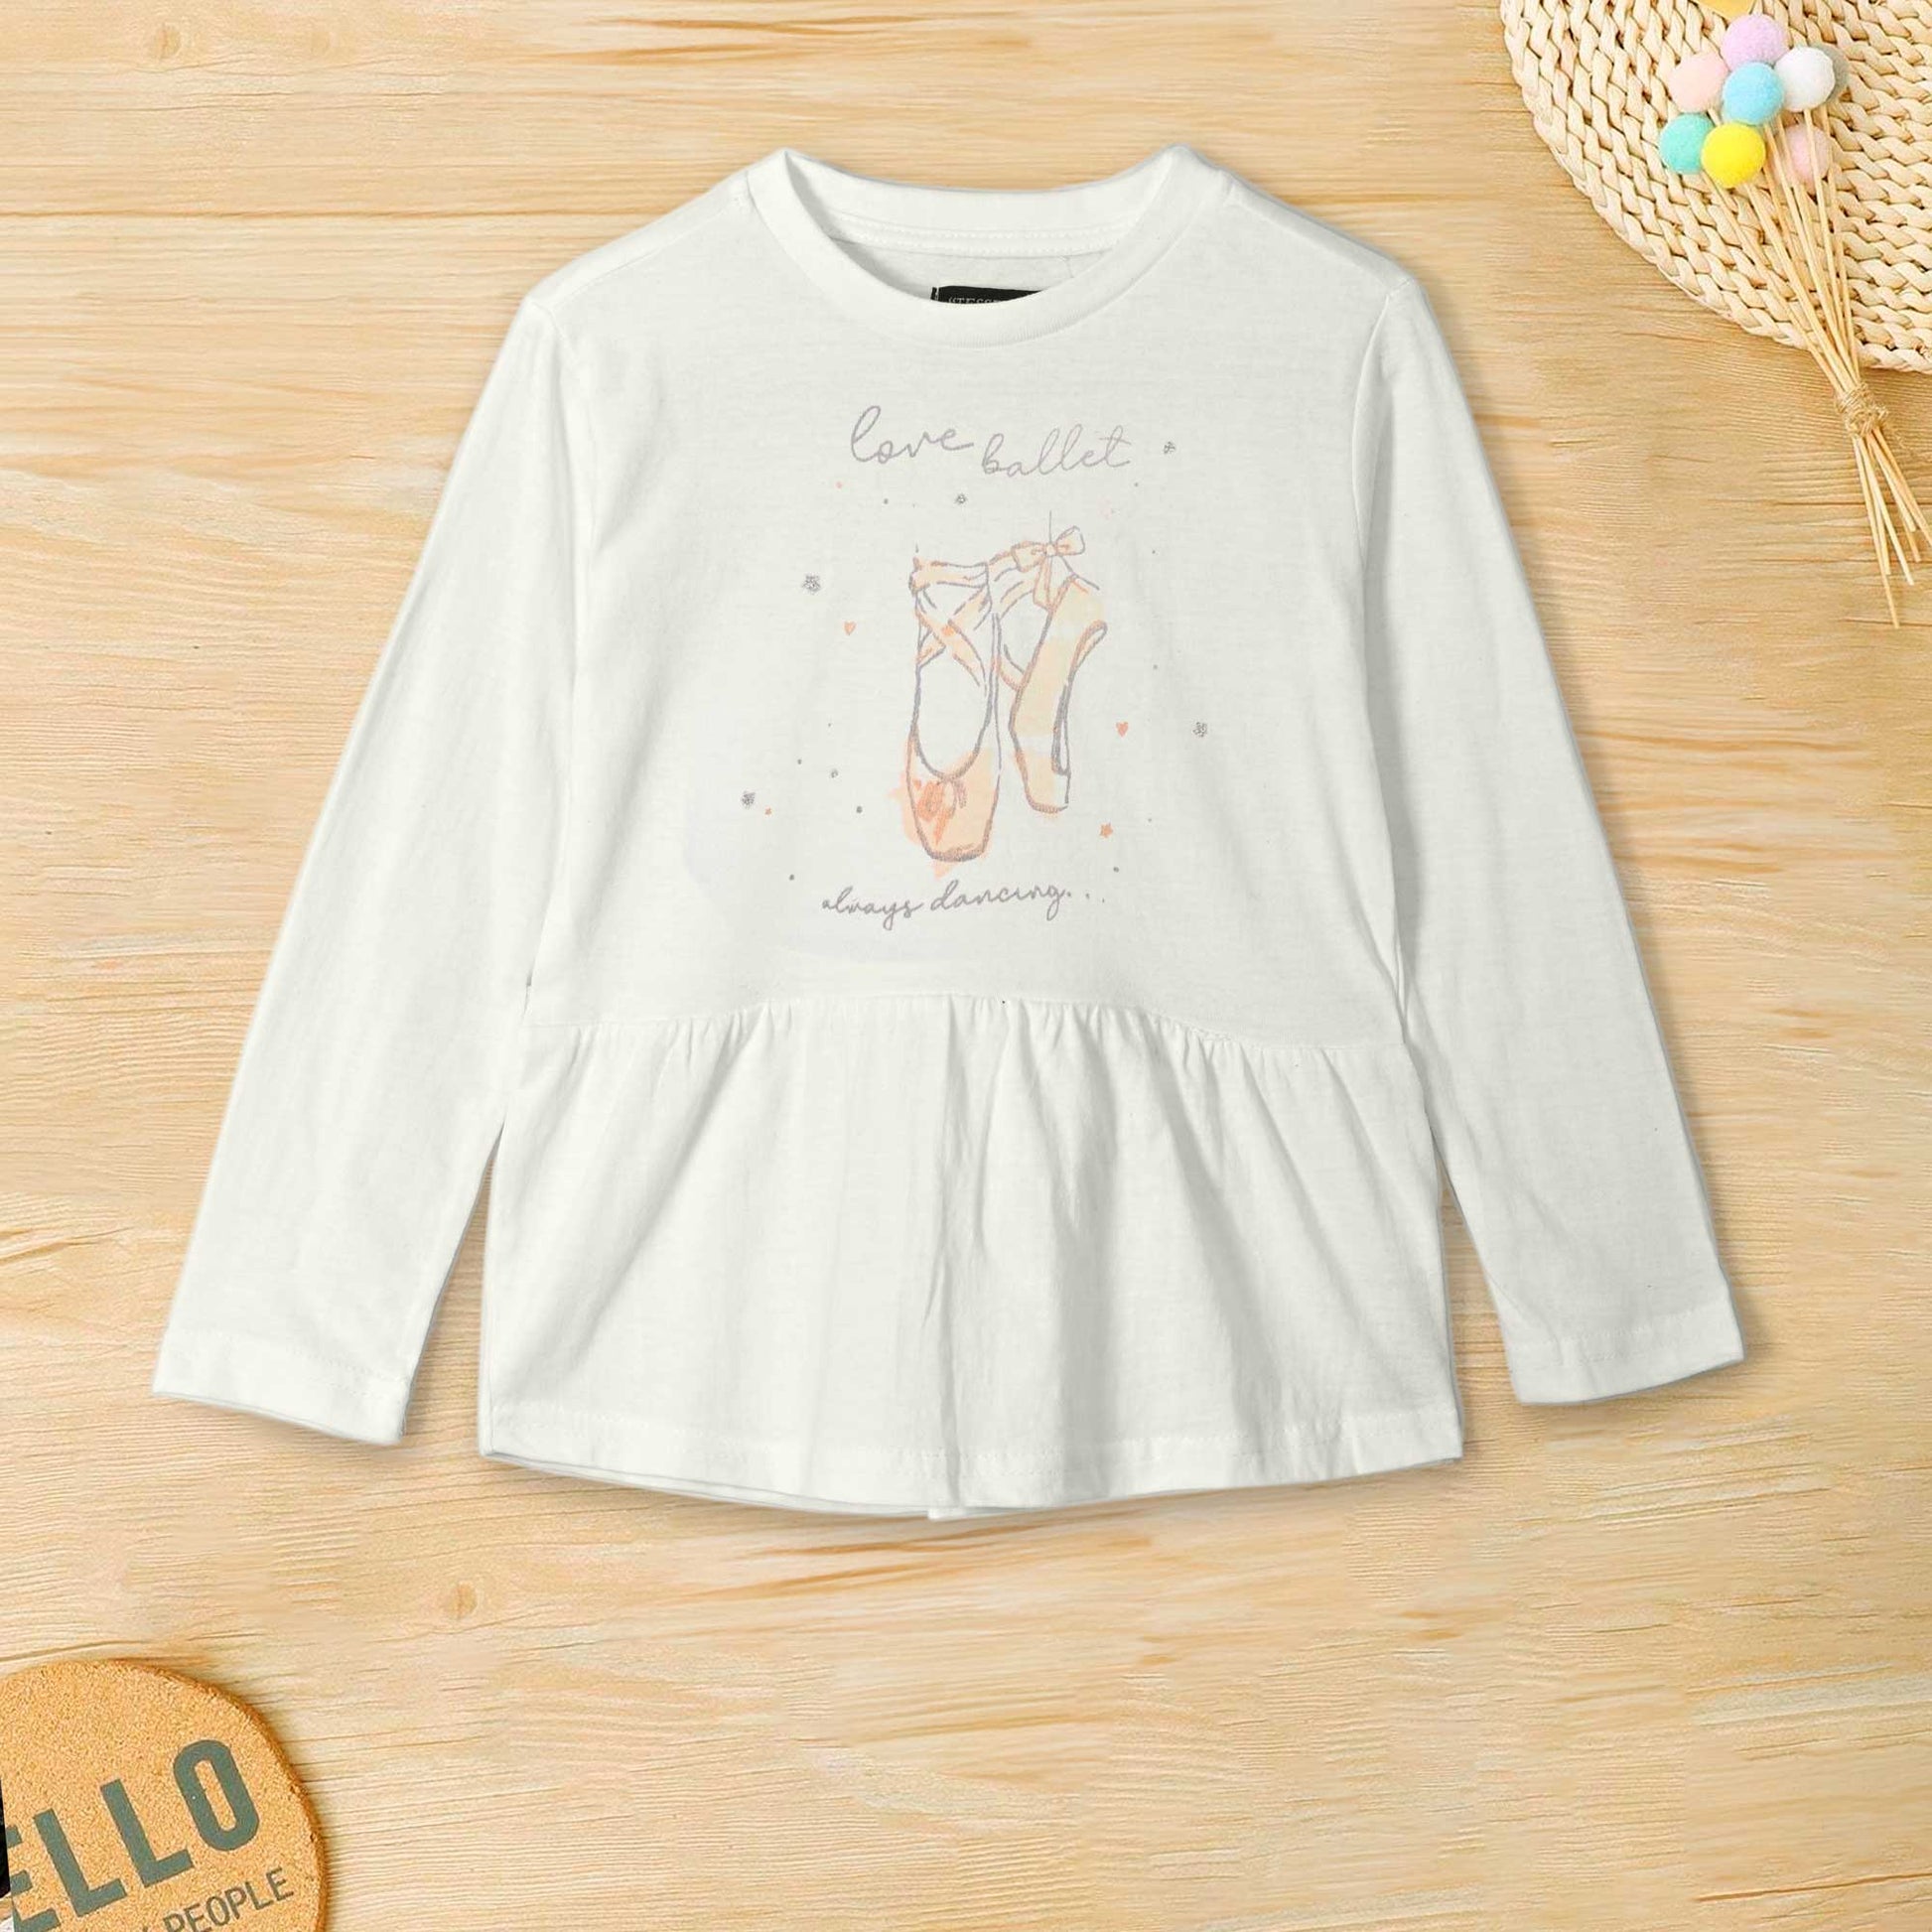 Tessentials Girl's Always Dancing Printed Long Sleeves Frock Style Shirt Girl's Tee Shirt HAS Apparel White 1-2 Years 